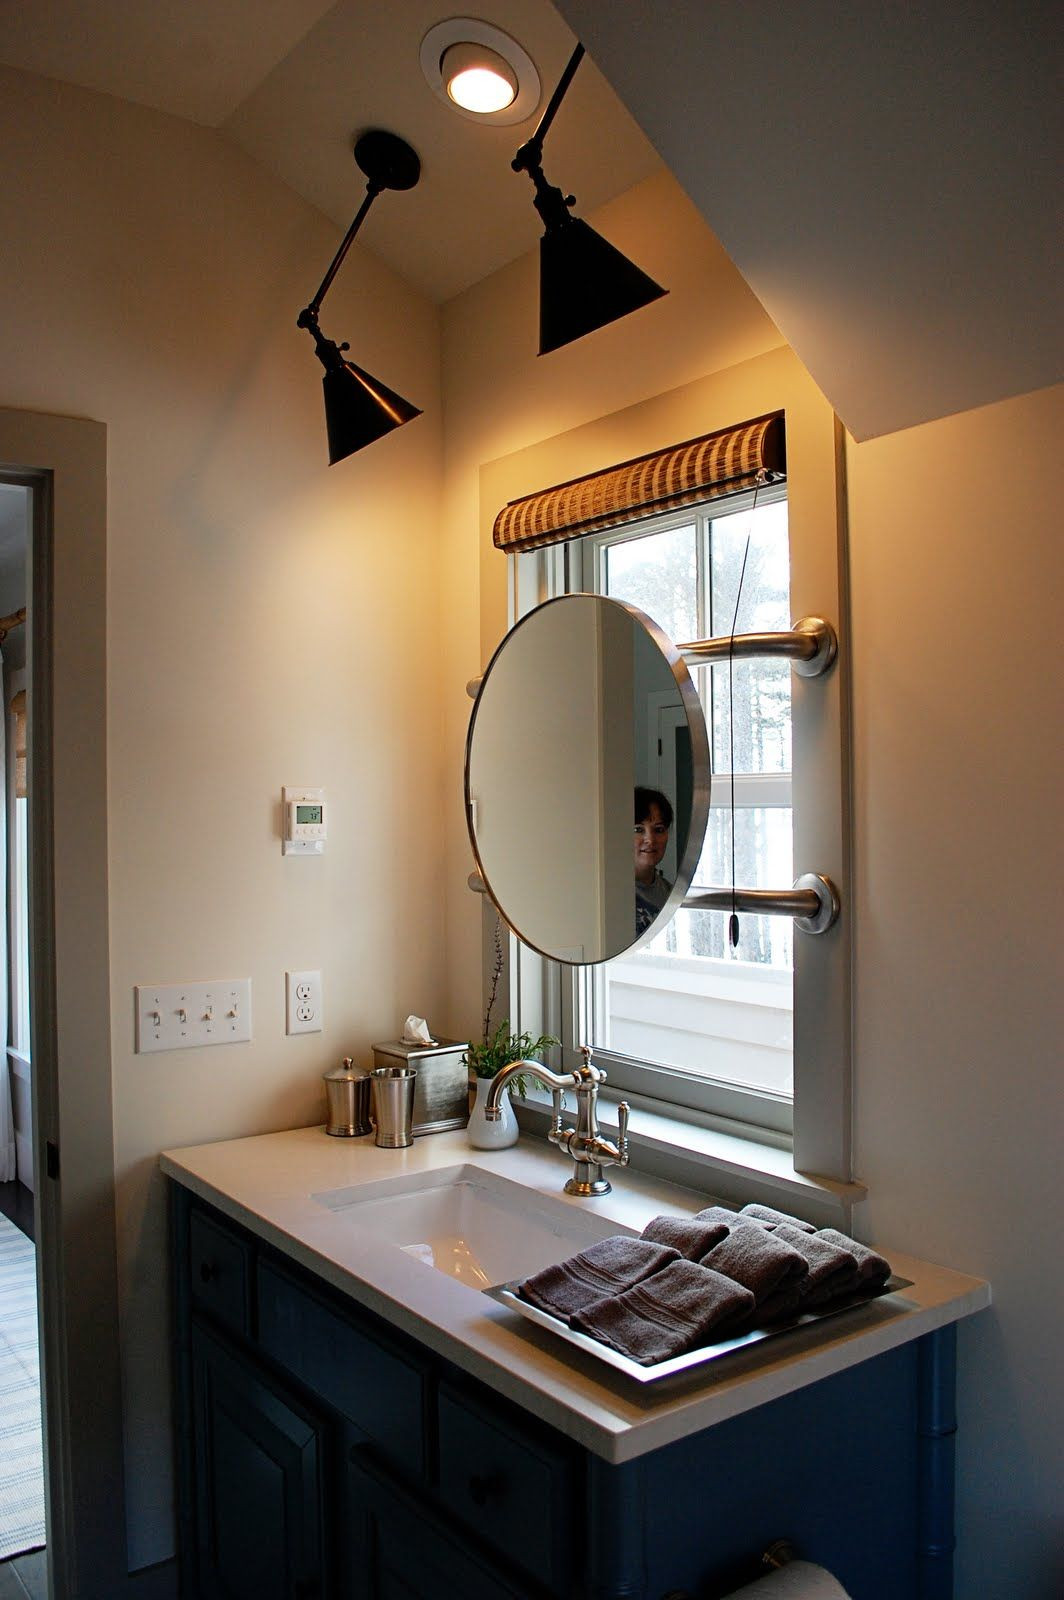 Mirrors Over Bathroom Sinks
 mirror in front of window might have to do this in the